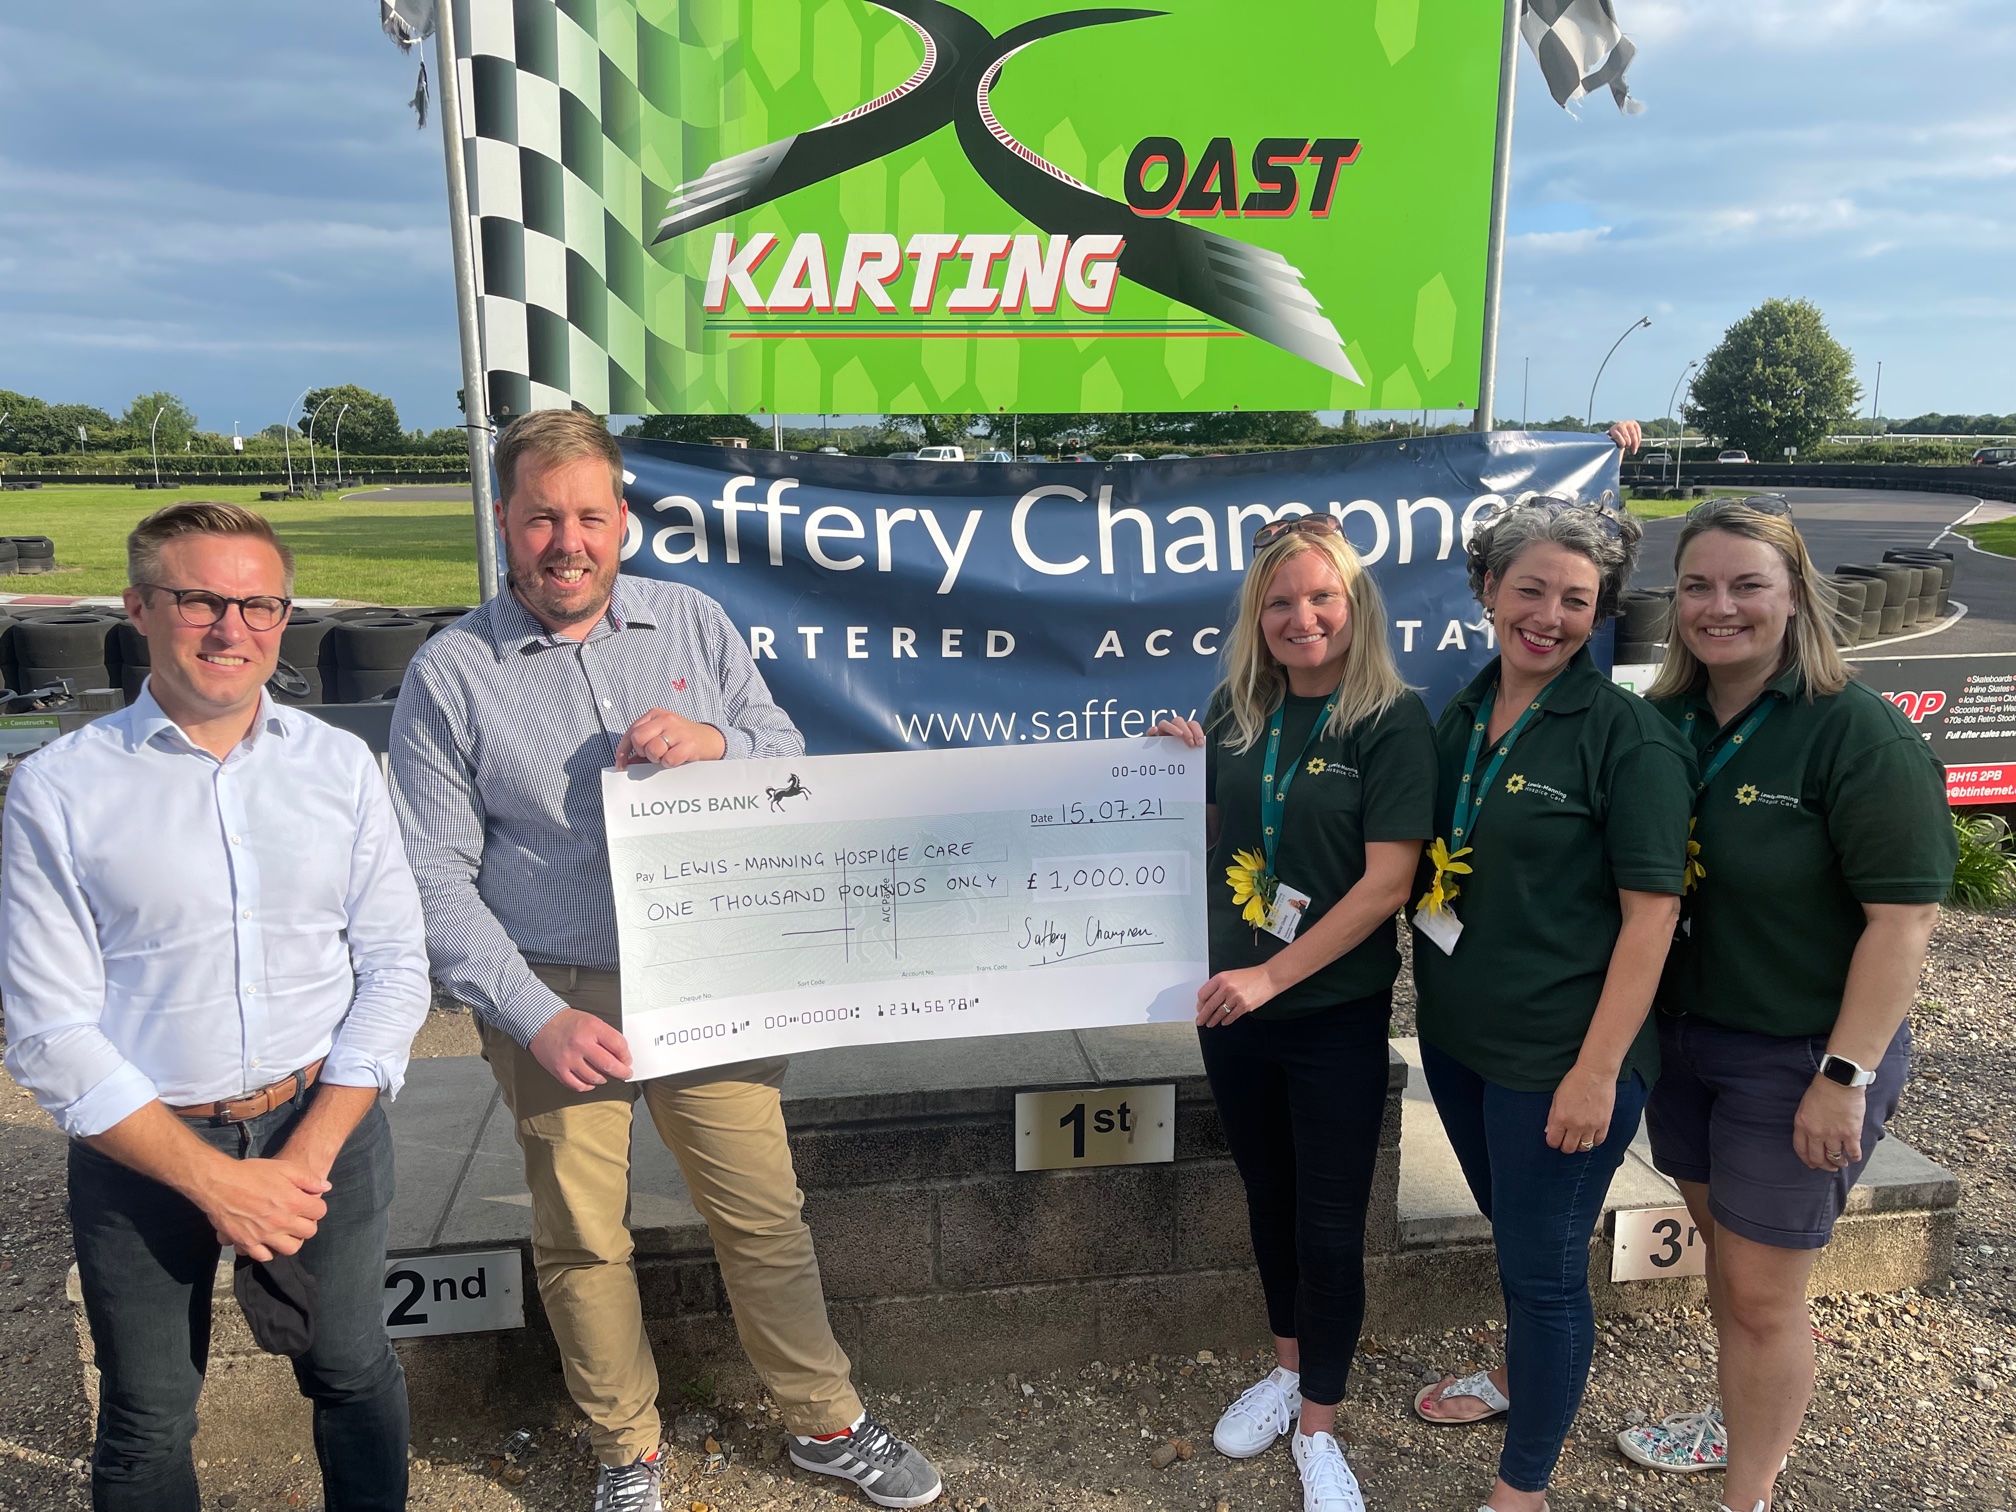 Law firms compete in Go Karting Challenge, hosted by Saffery Champness Chartered Accountants, raising funds for Lewis-Manning Hospice Care